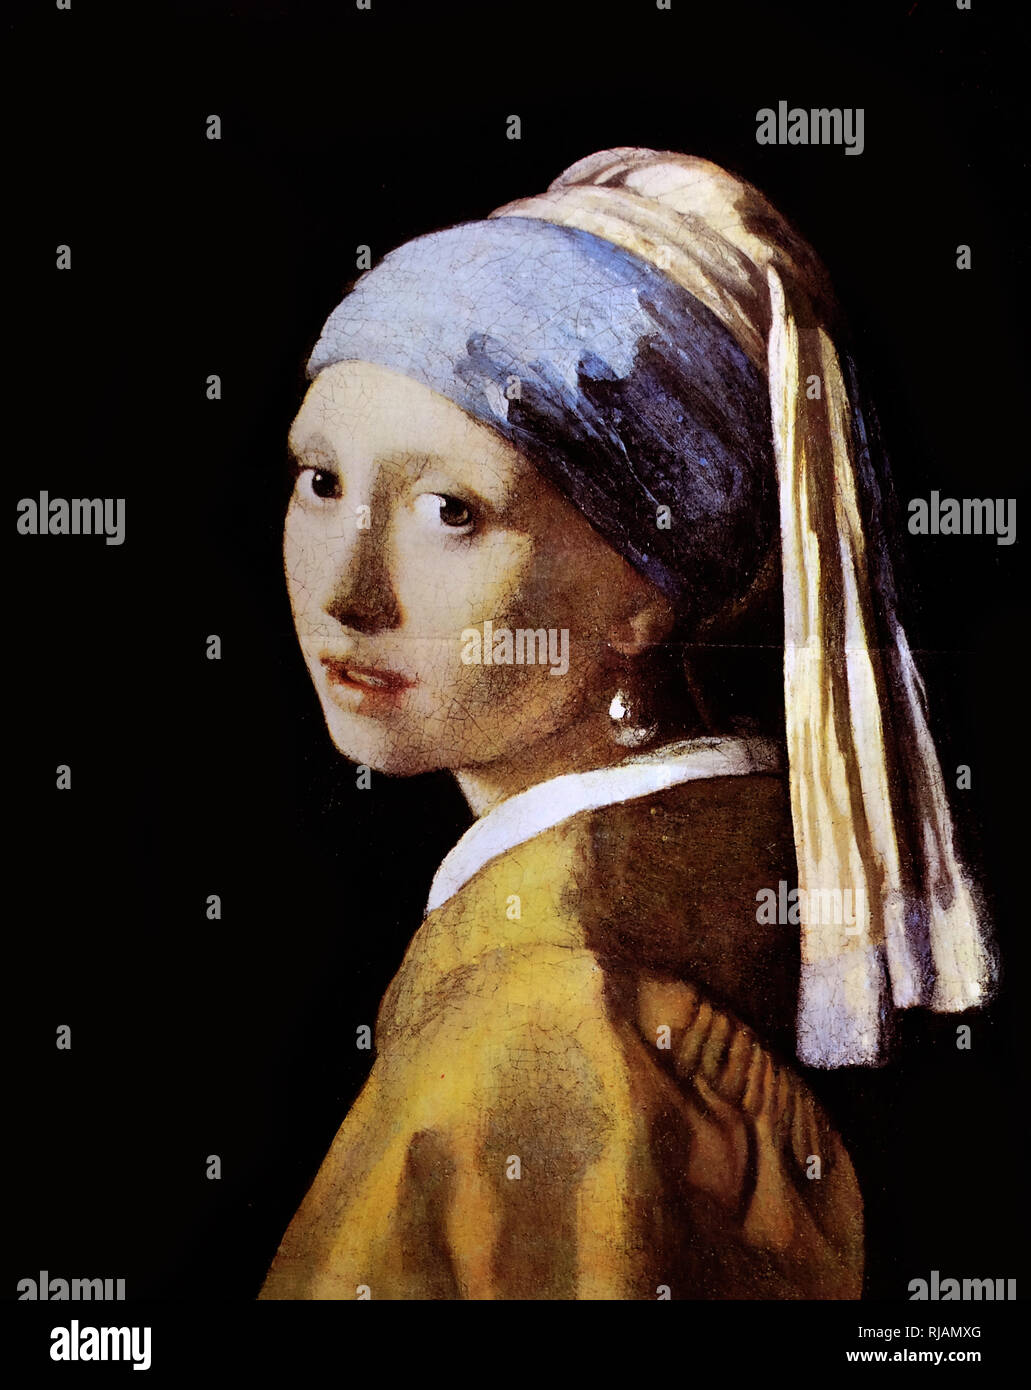 Girl with a Pearl Earring by Johannes Vermeer. c. 1665. Oil on canvas. Girl with a Pearl Earring is an oil painting by Dutch Golden Age painter Johannes Vermeer. It is a tronie of a girl wearing a headscarf and a pearl earring. Stock Photo